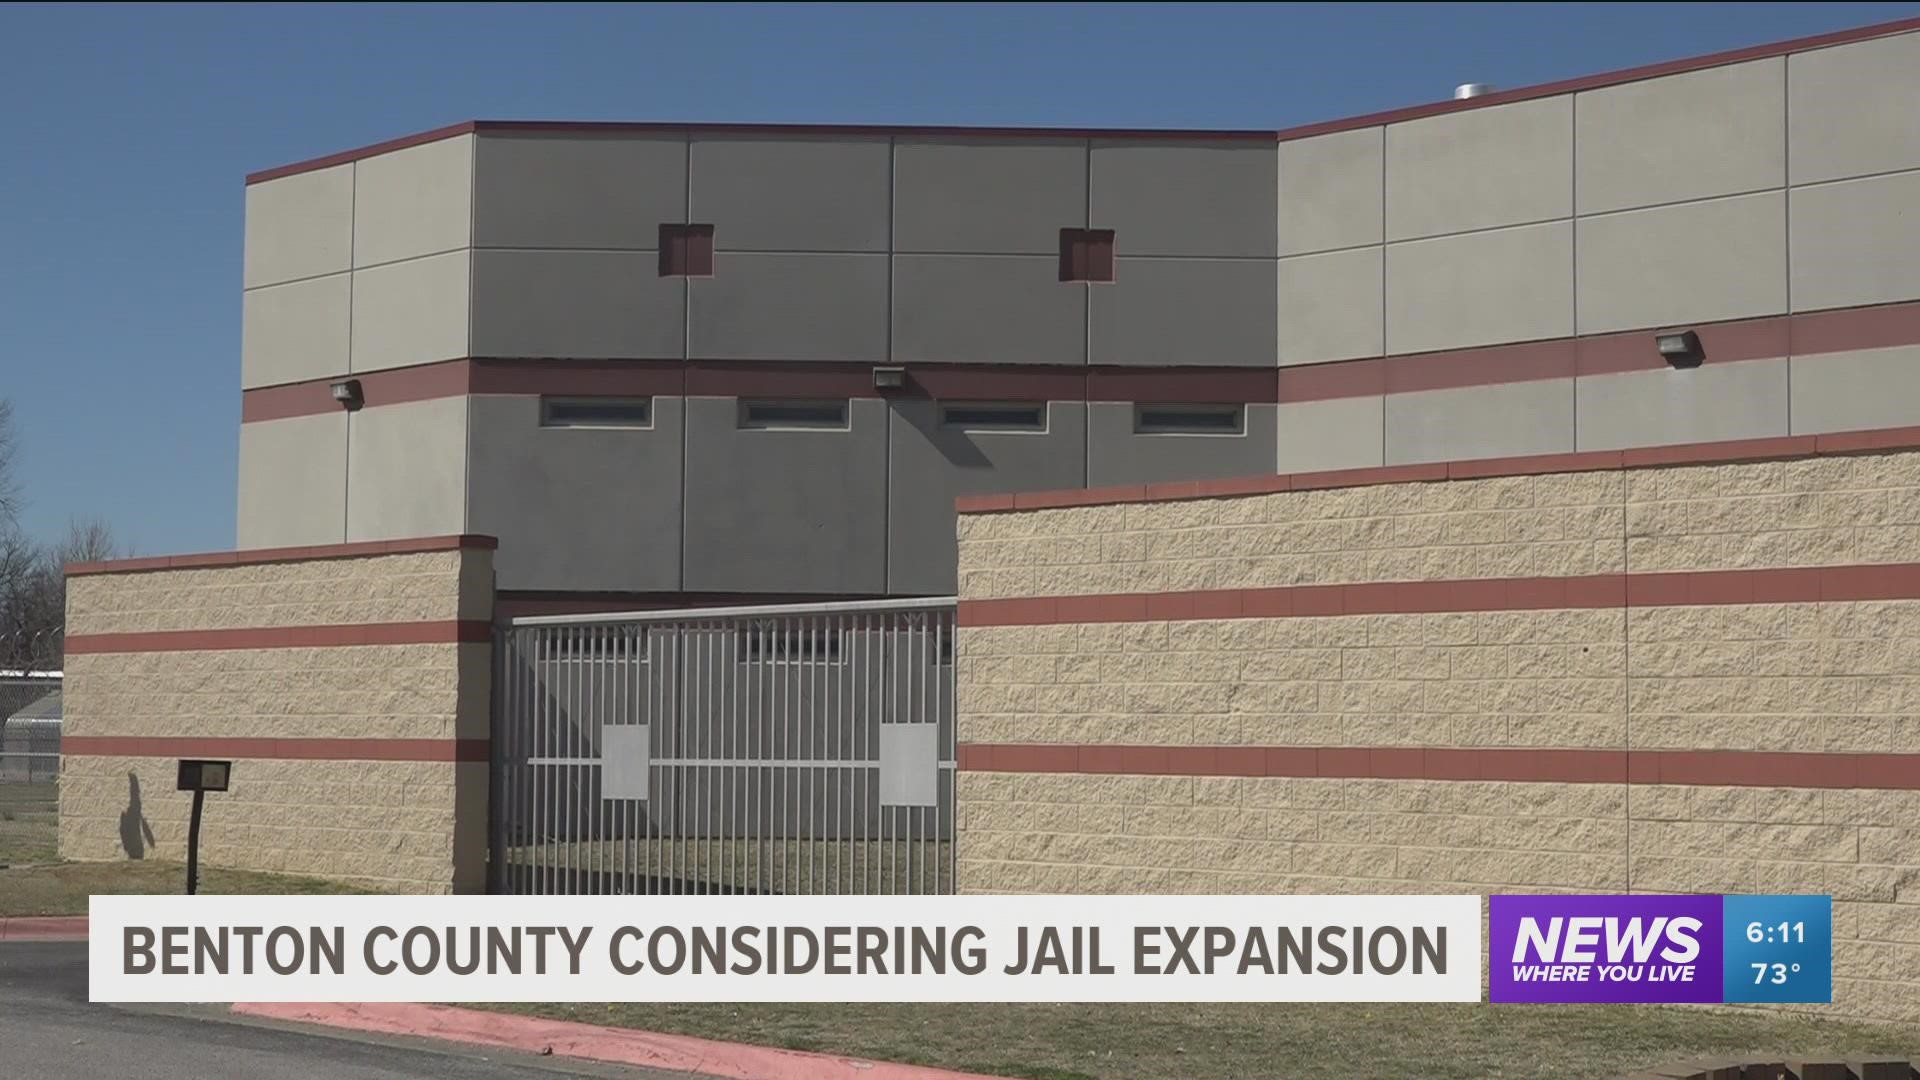 Benton County leaders are hoping voters will approve expanding the county jail, which has been battling overcrowding issues for several years.